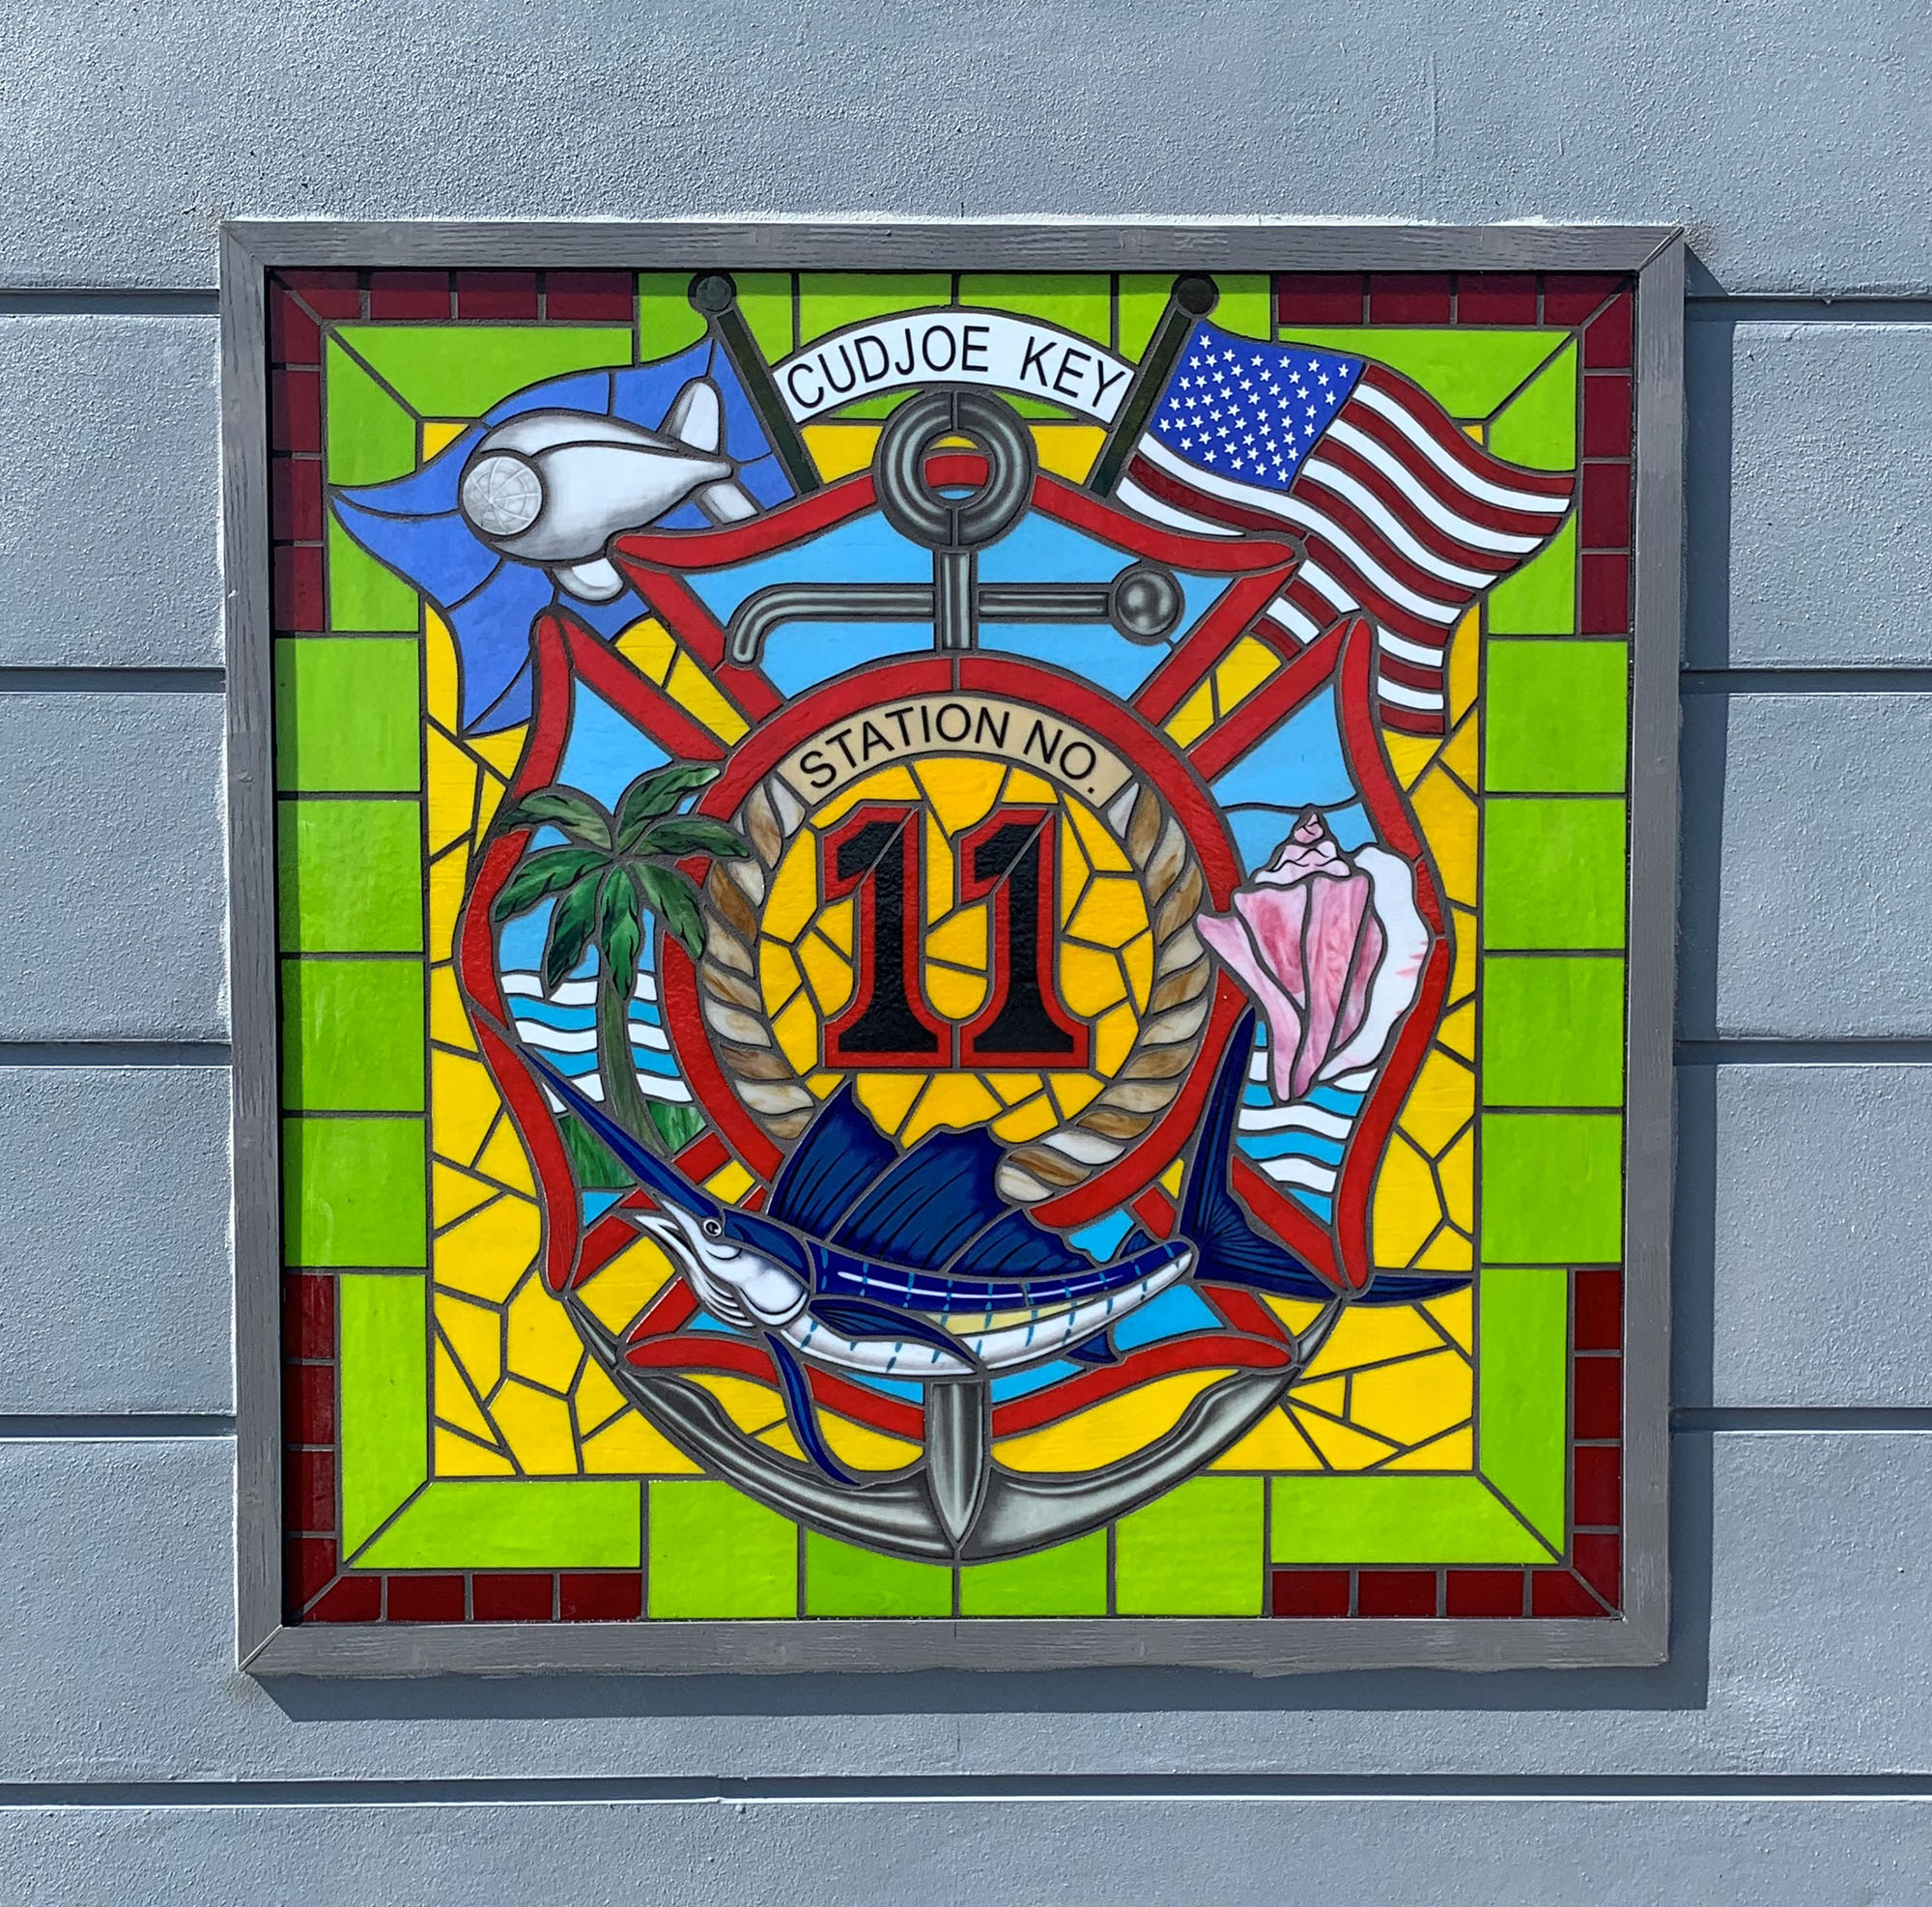 Traditional style stained glass window with red, green, and yellow colored glass and the fire station number.